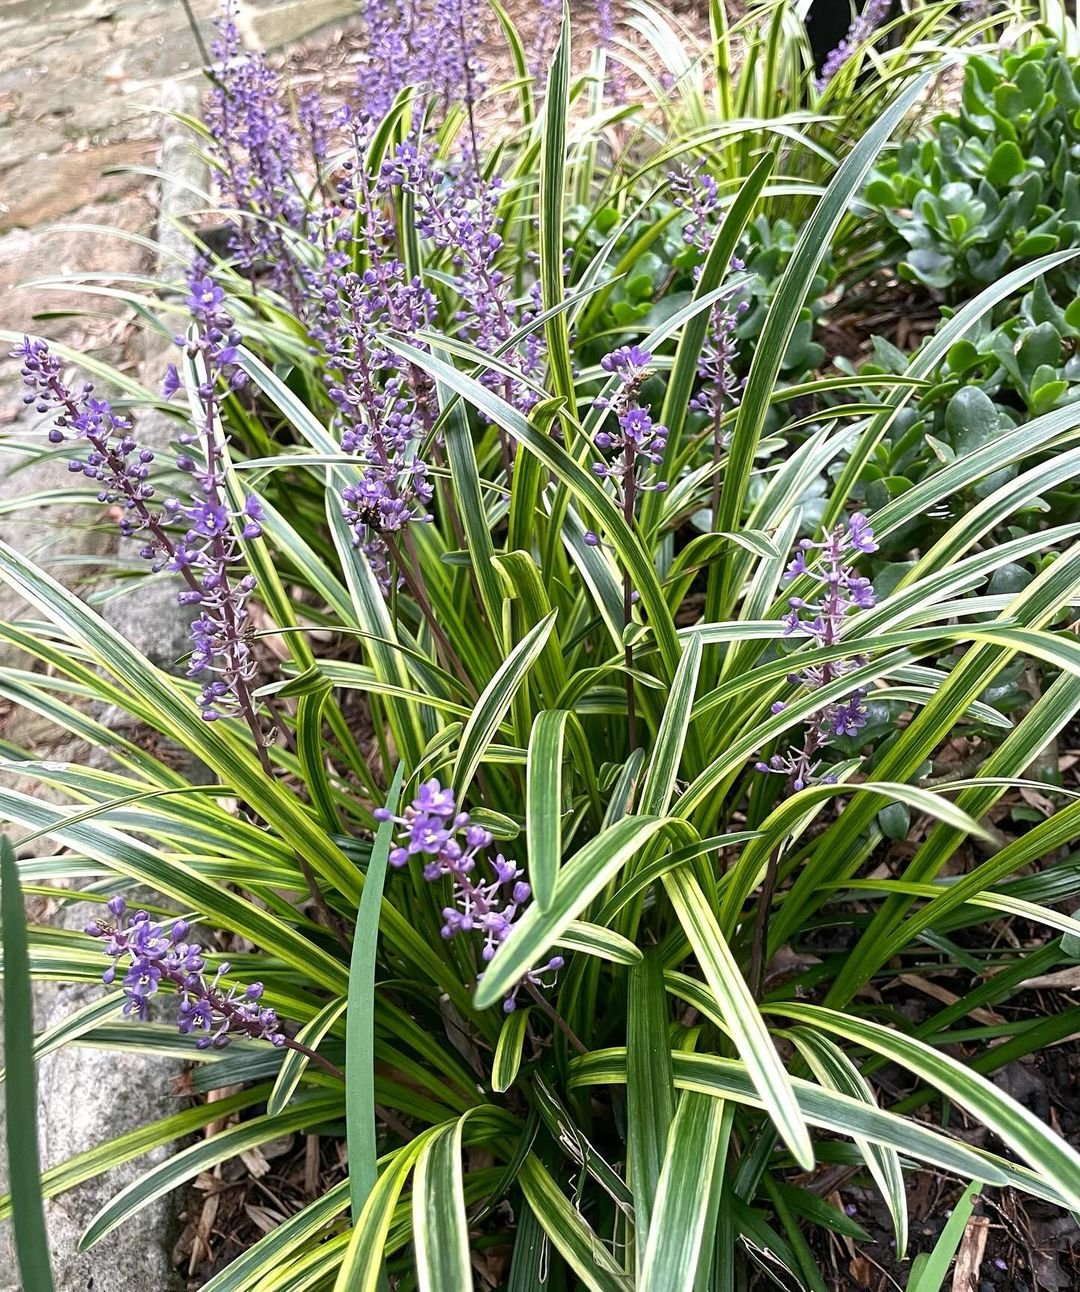 A Liriope muscari plant with vibrant purple flowers and lush green leaves.